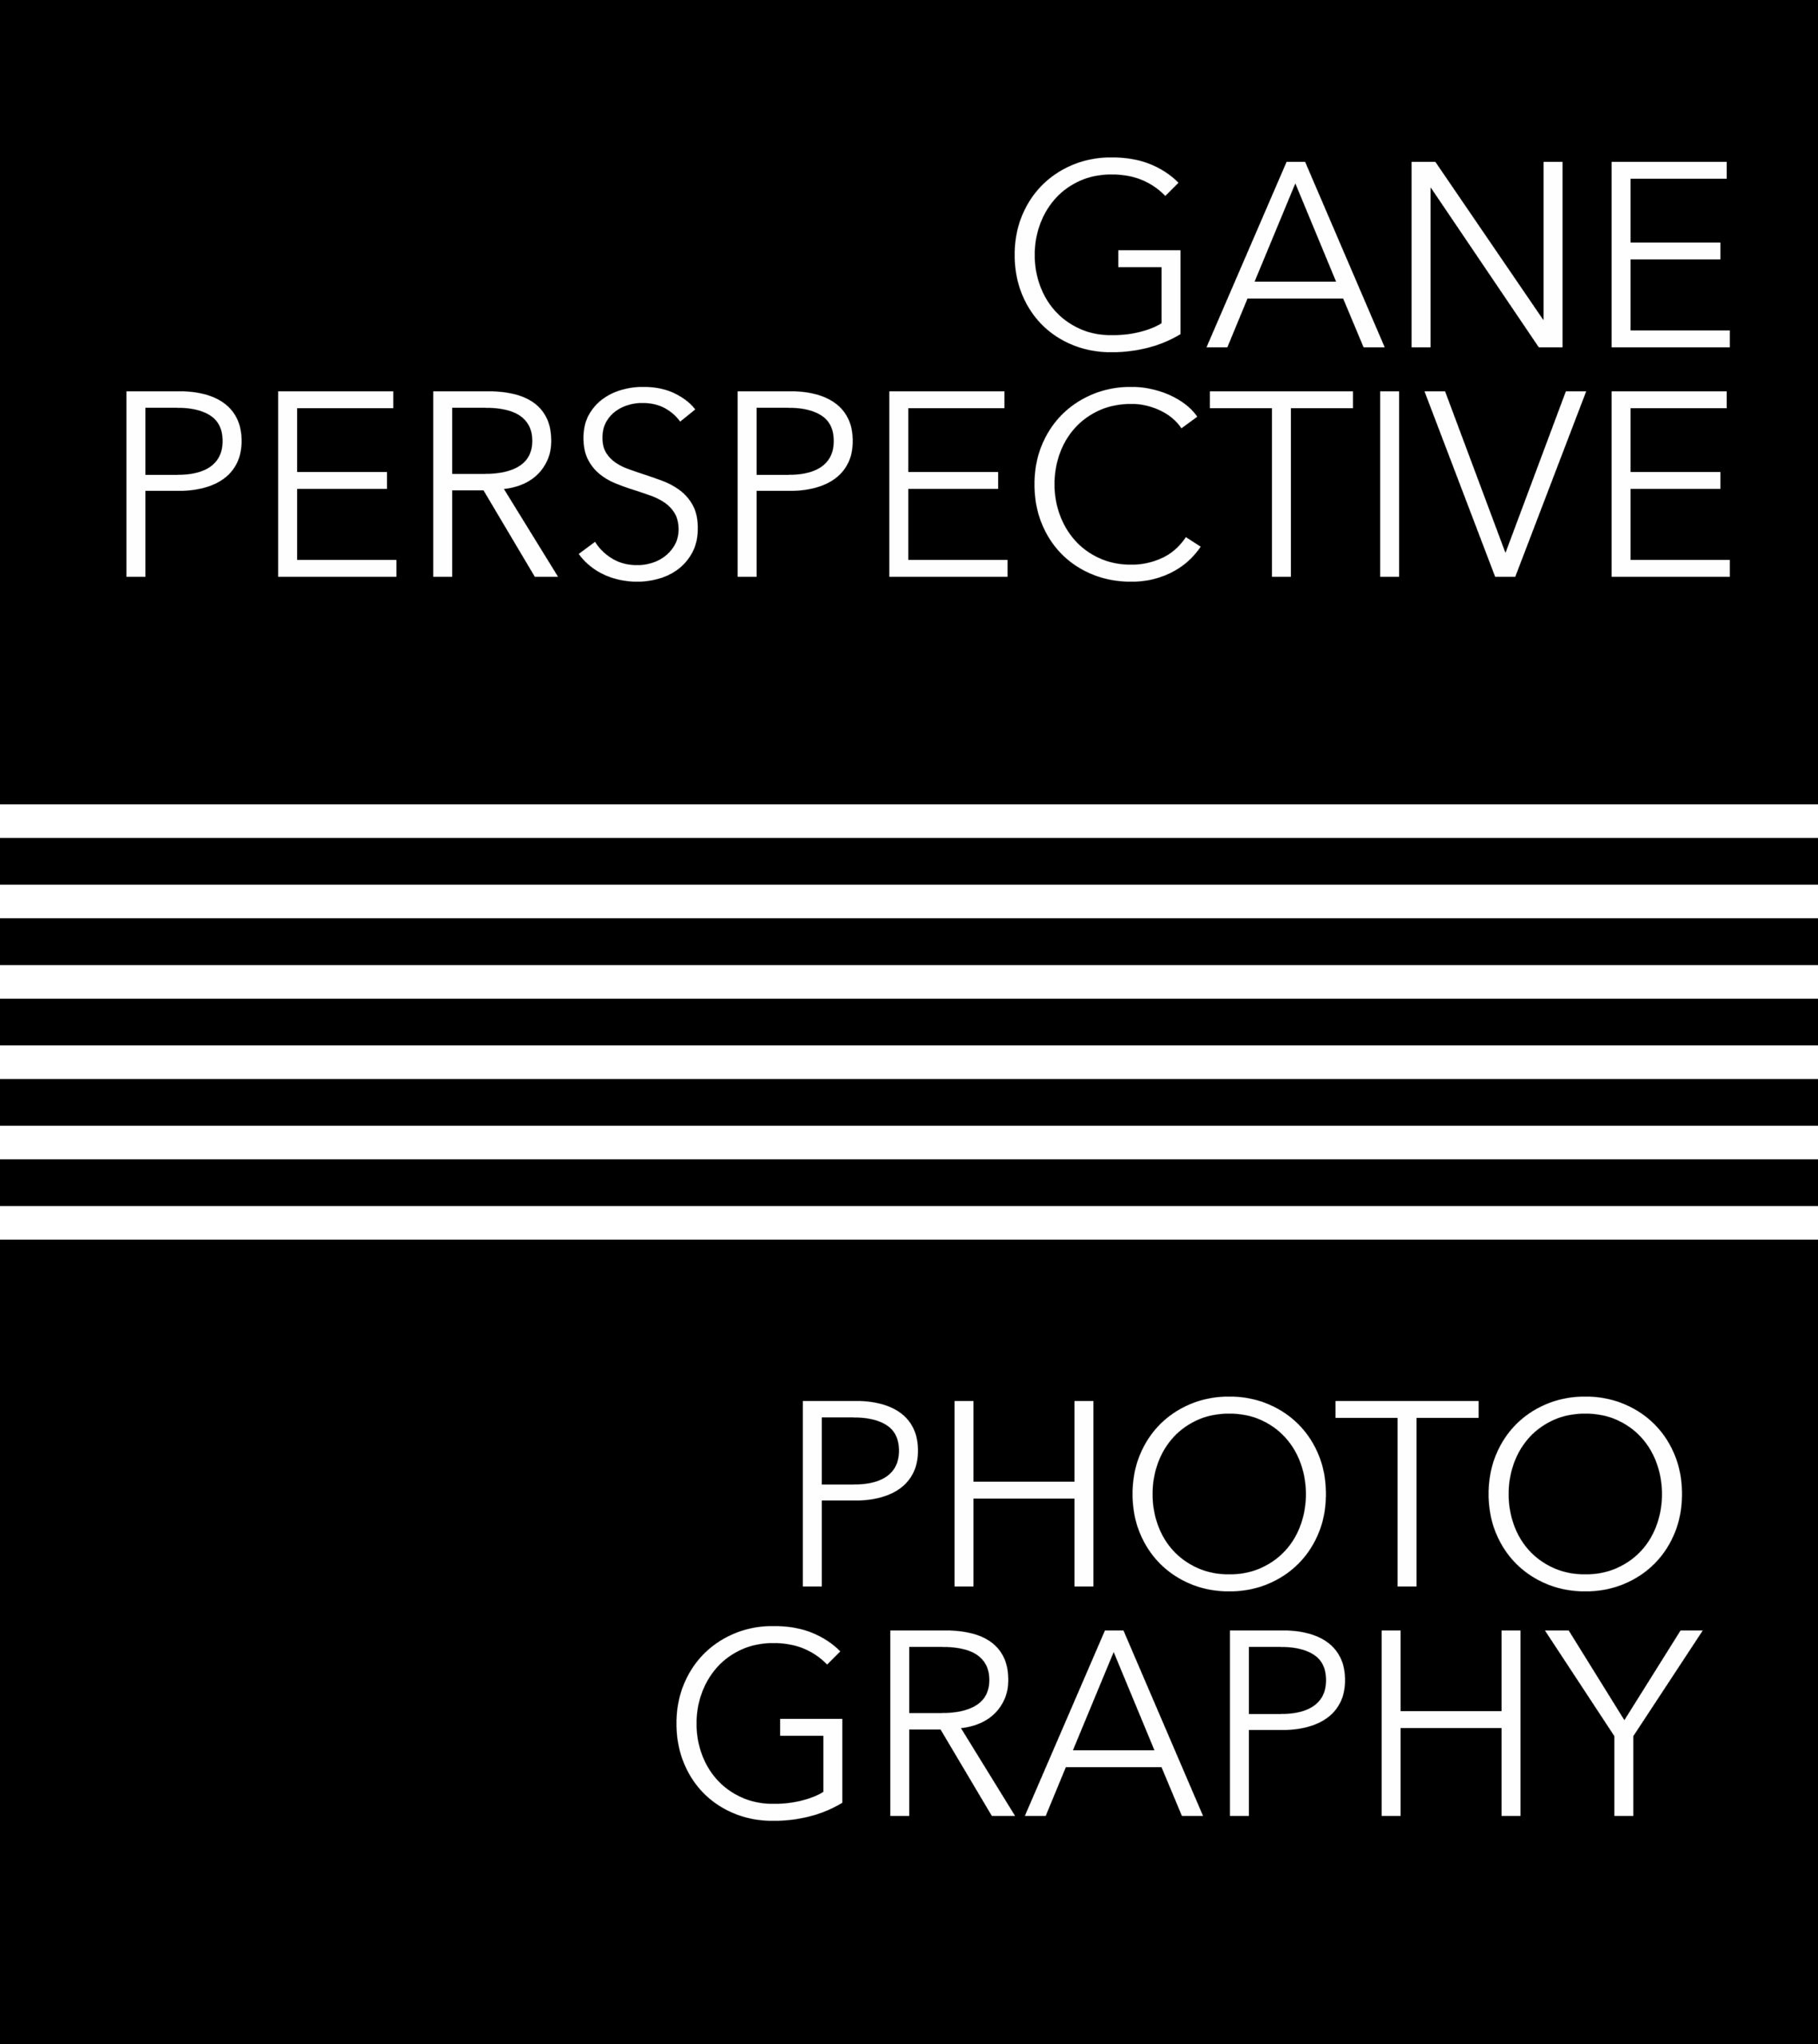 Gane Perspective Photography